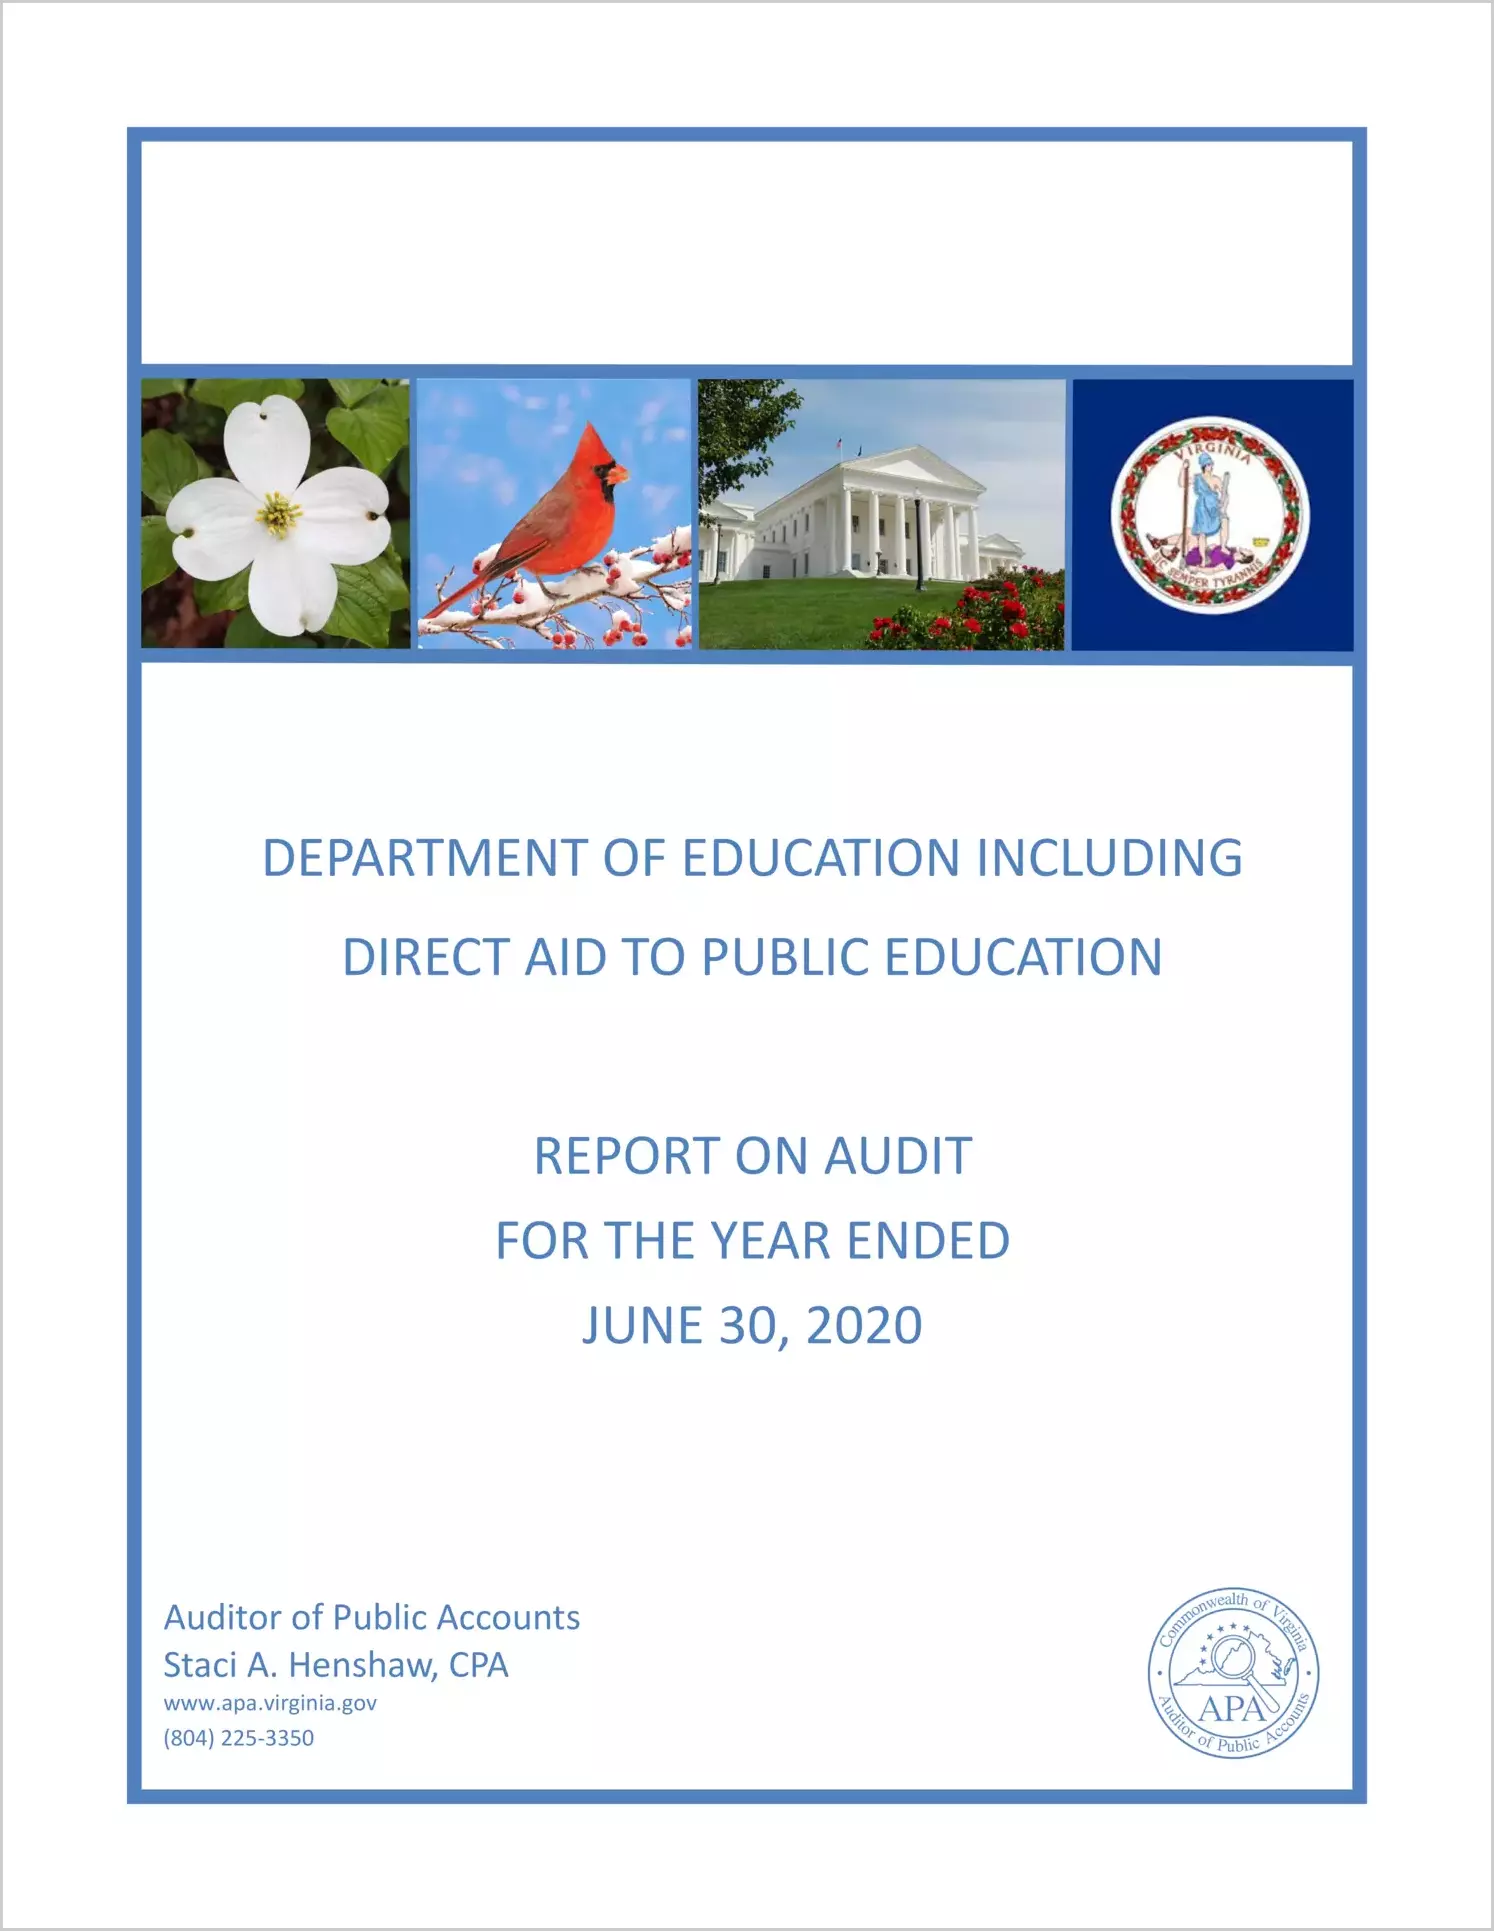 Department of Education including Direct Aid to Public Education for the year ended June 30, 2020